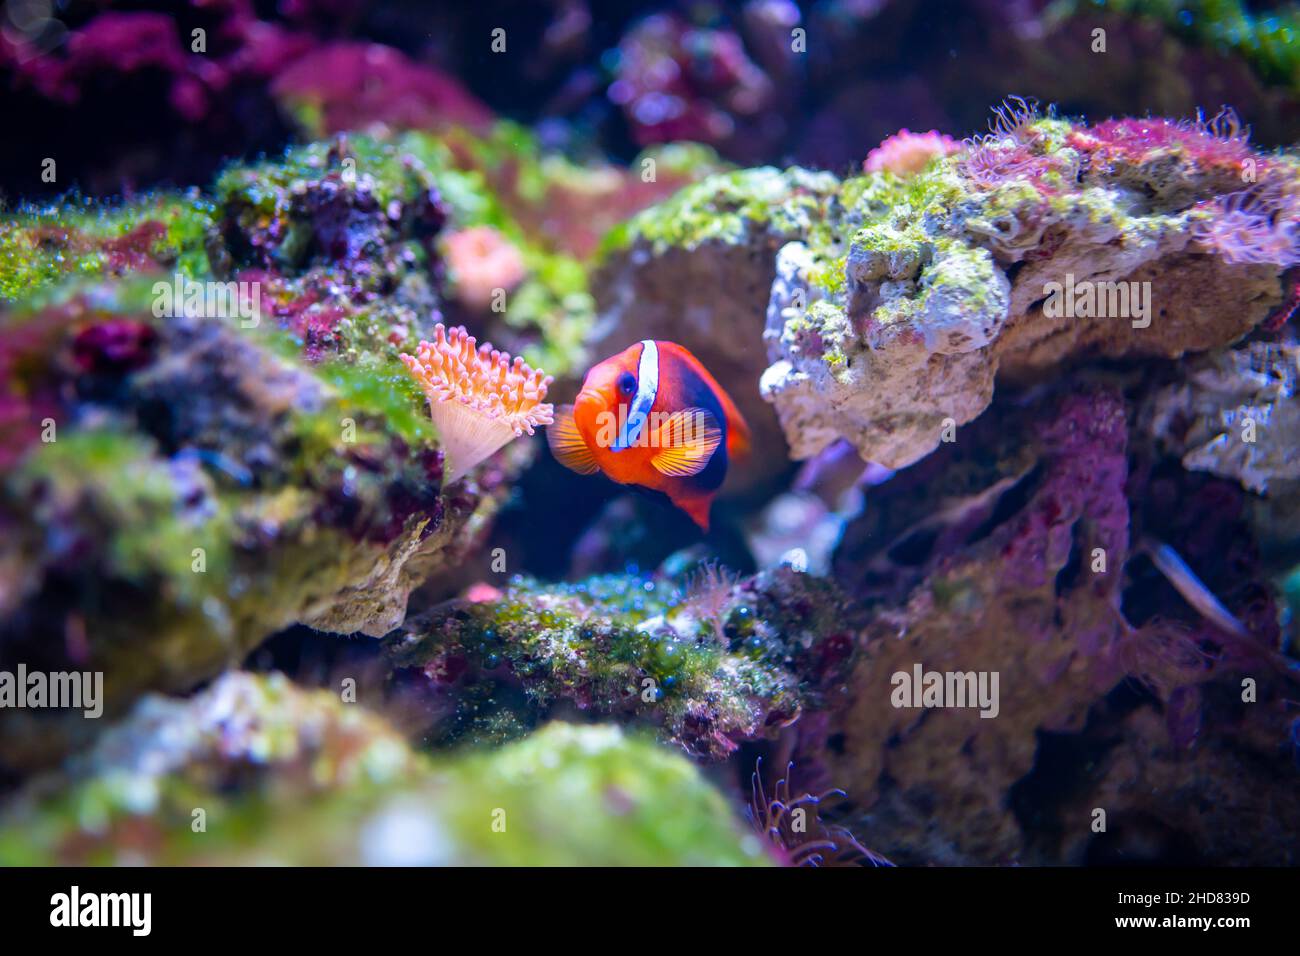 Beautiful aquarium with different types of fish and corals in the neon light in Prague, Czech republic Stock Photo